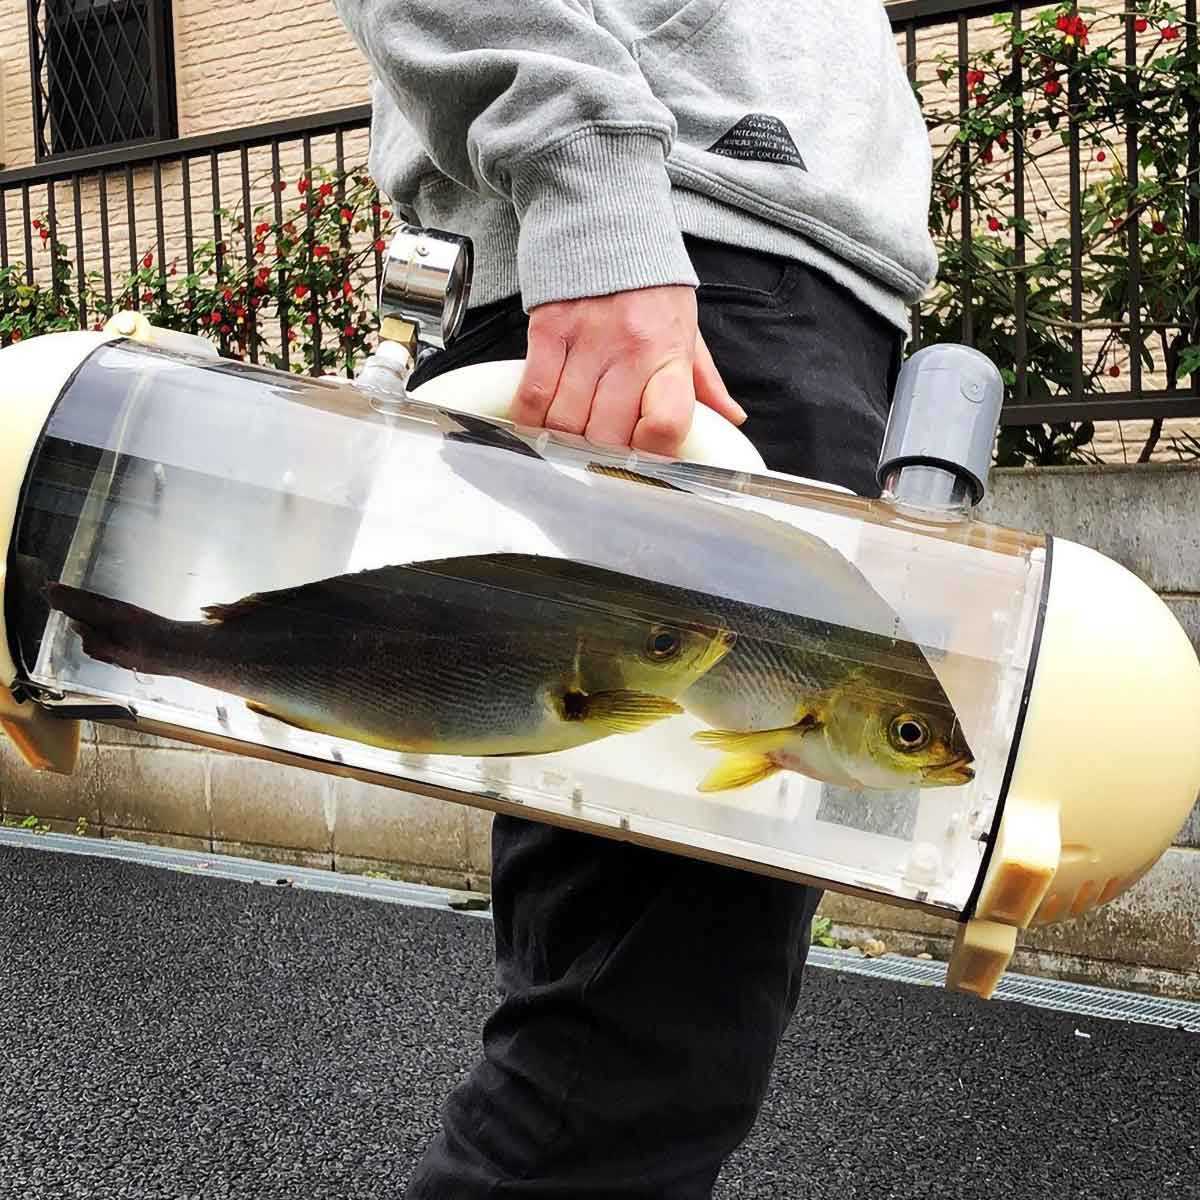 This specially designed Japanese bag is a portable fish tank that